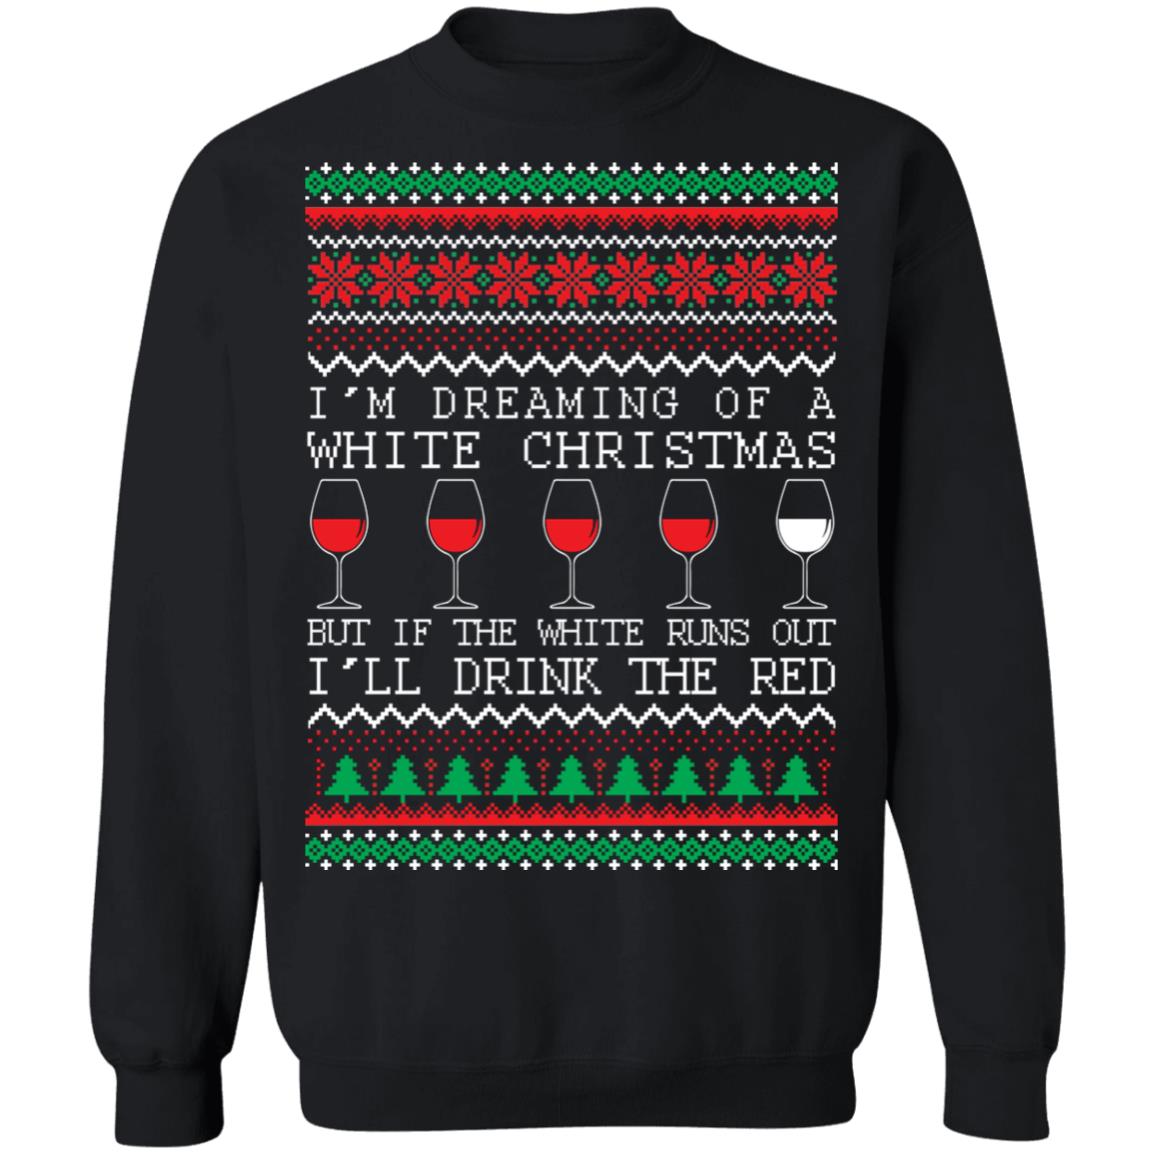  I’m Dreaming Of A White Christmas But If The White Runs Out I’ll Drink The Red Christmas Shirt